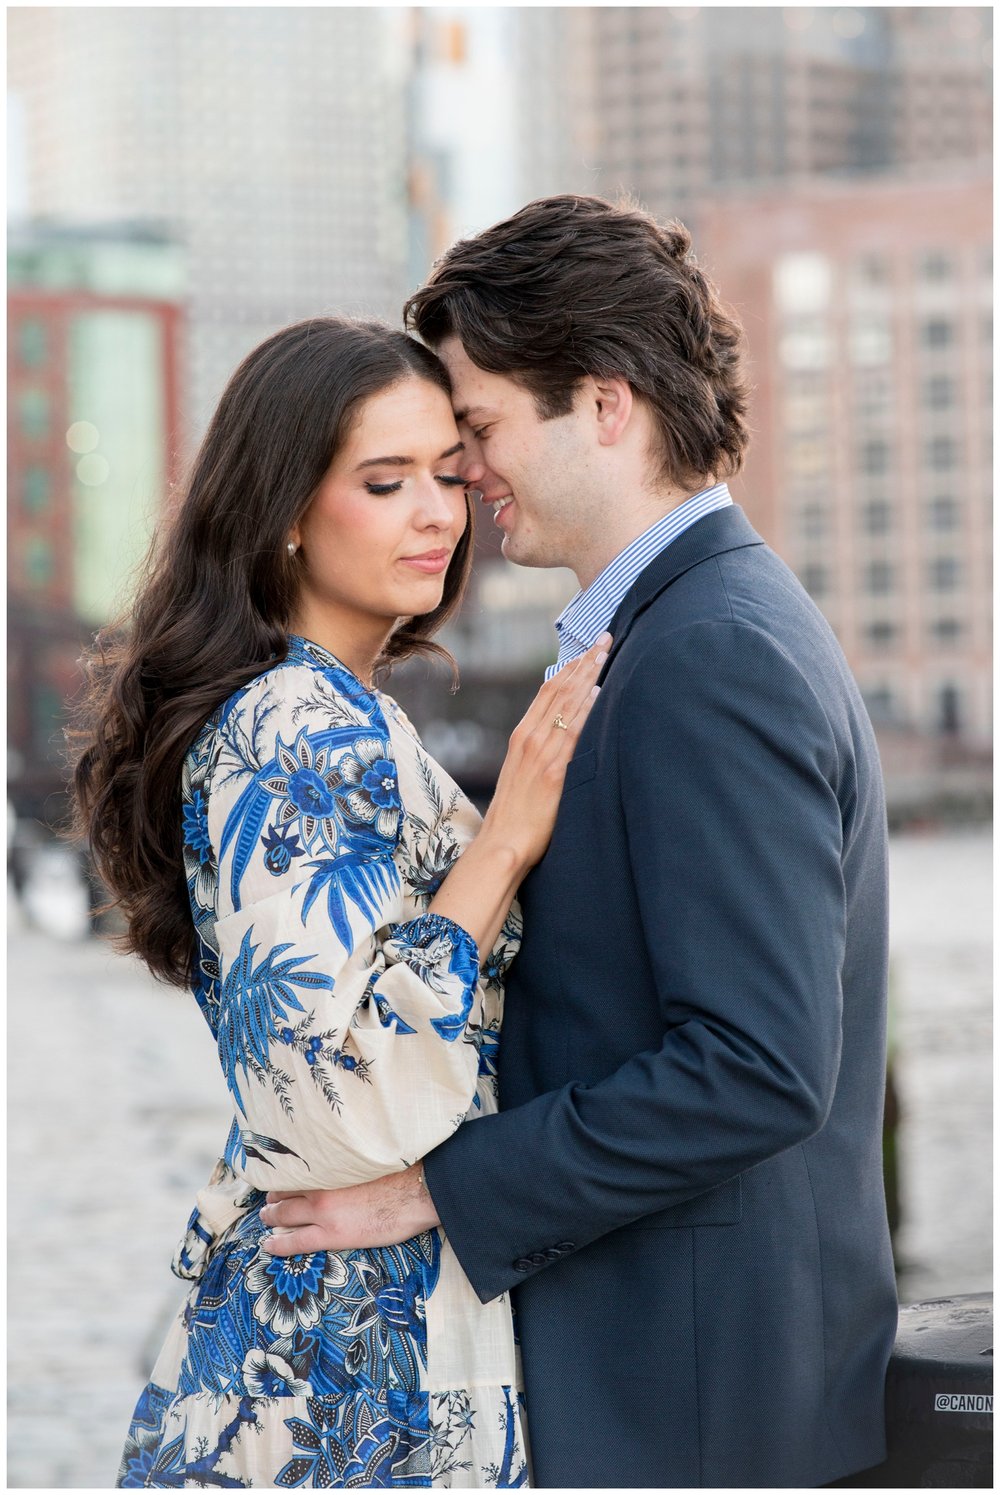 nuzzling pose of engaged couple in navy and cream formal attire